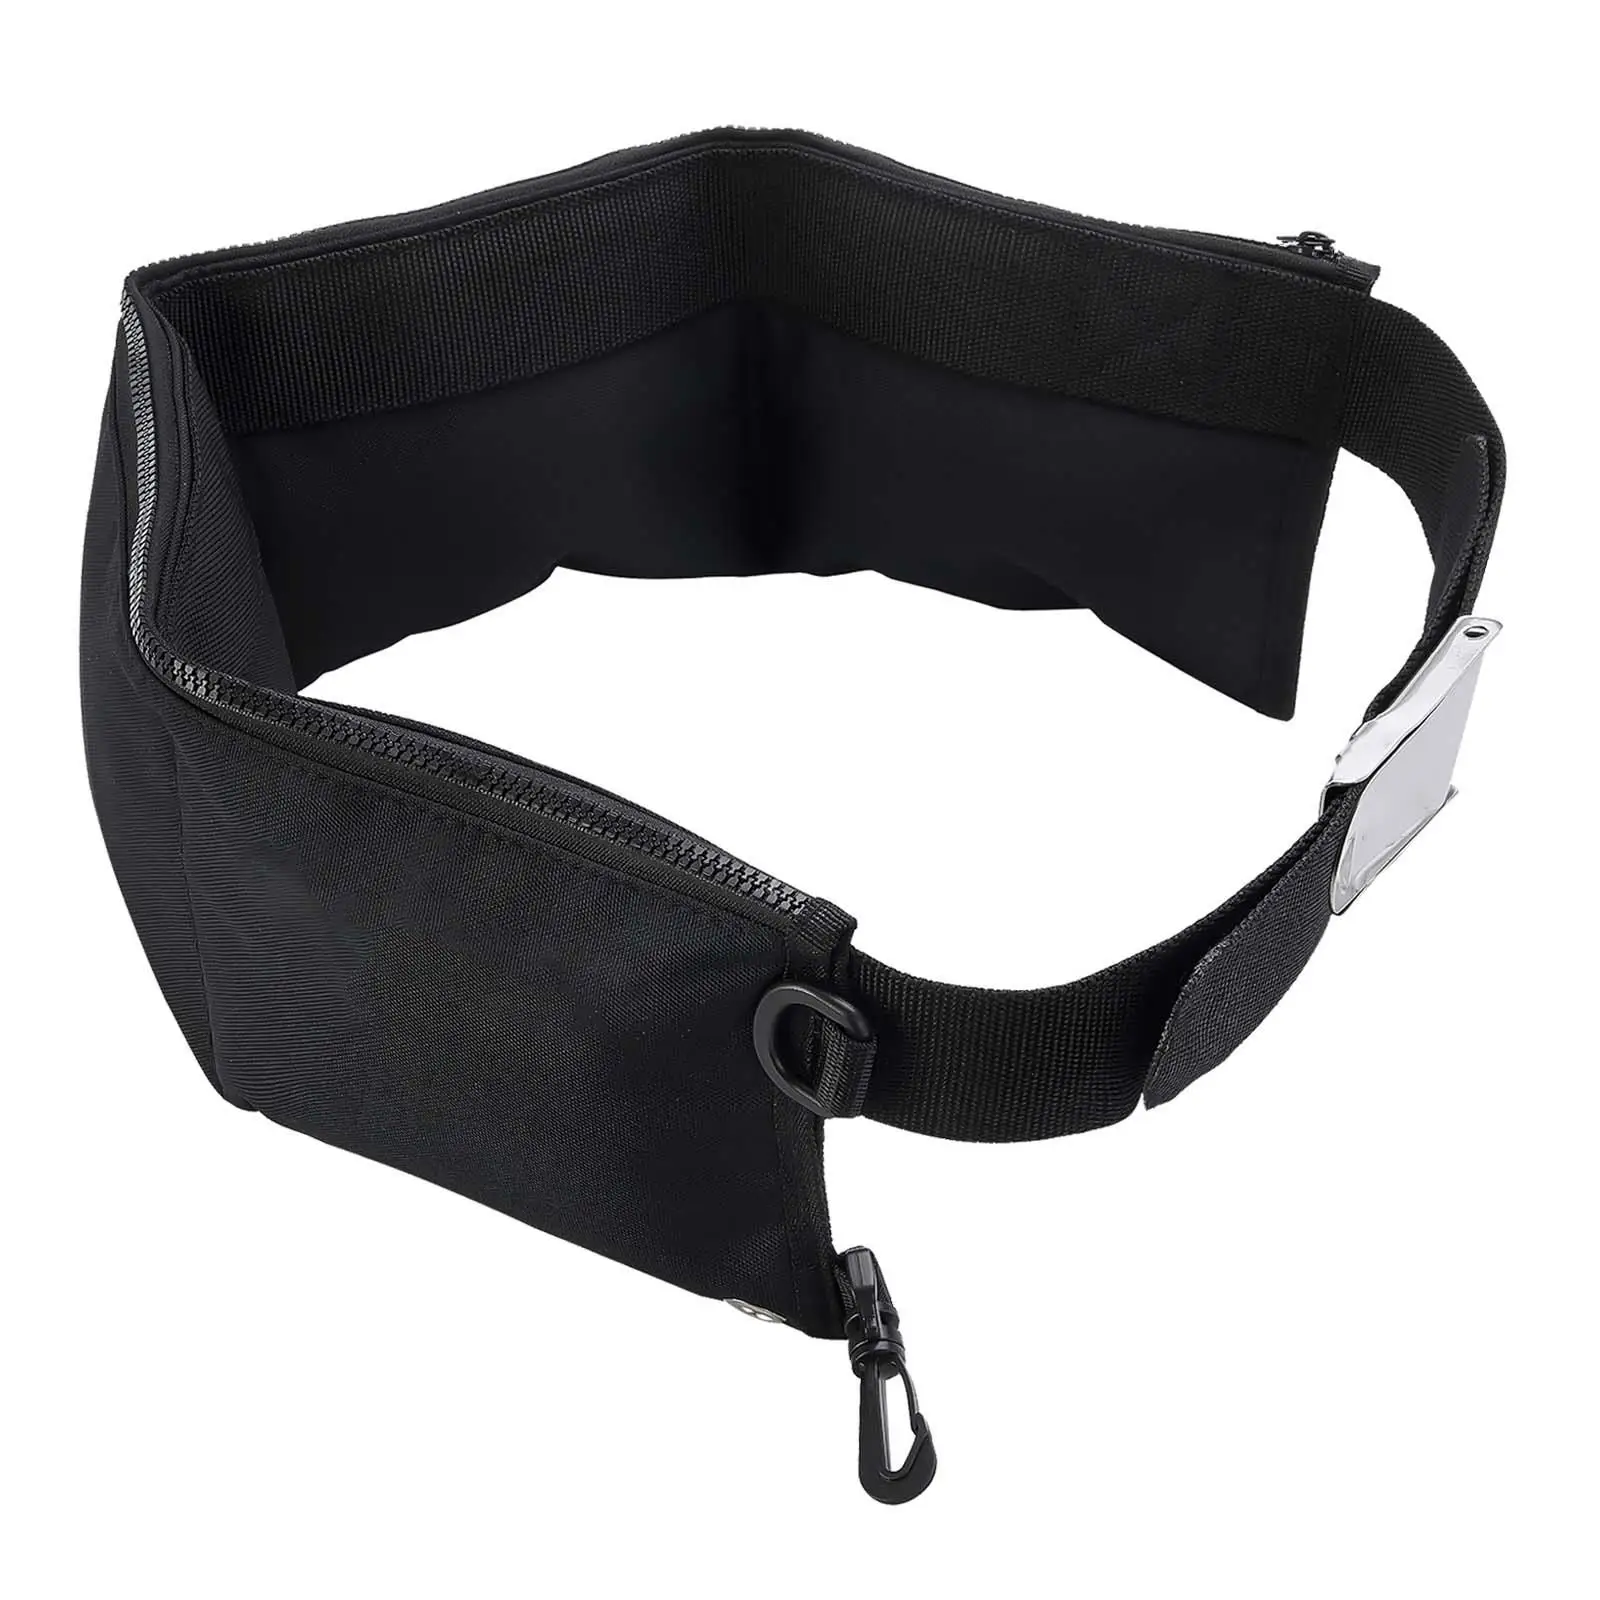 Scuba Weight Belt Diving Pocket Weight Belt for Free Diving Good Performance Comfortable Durable Accessories Adjustable Strap